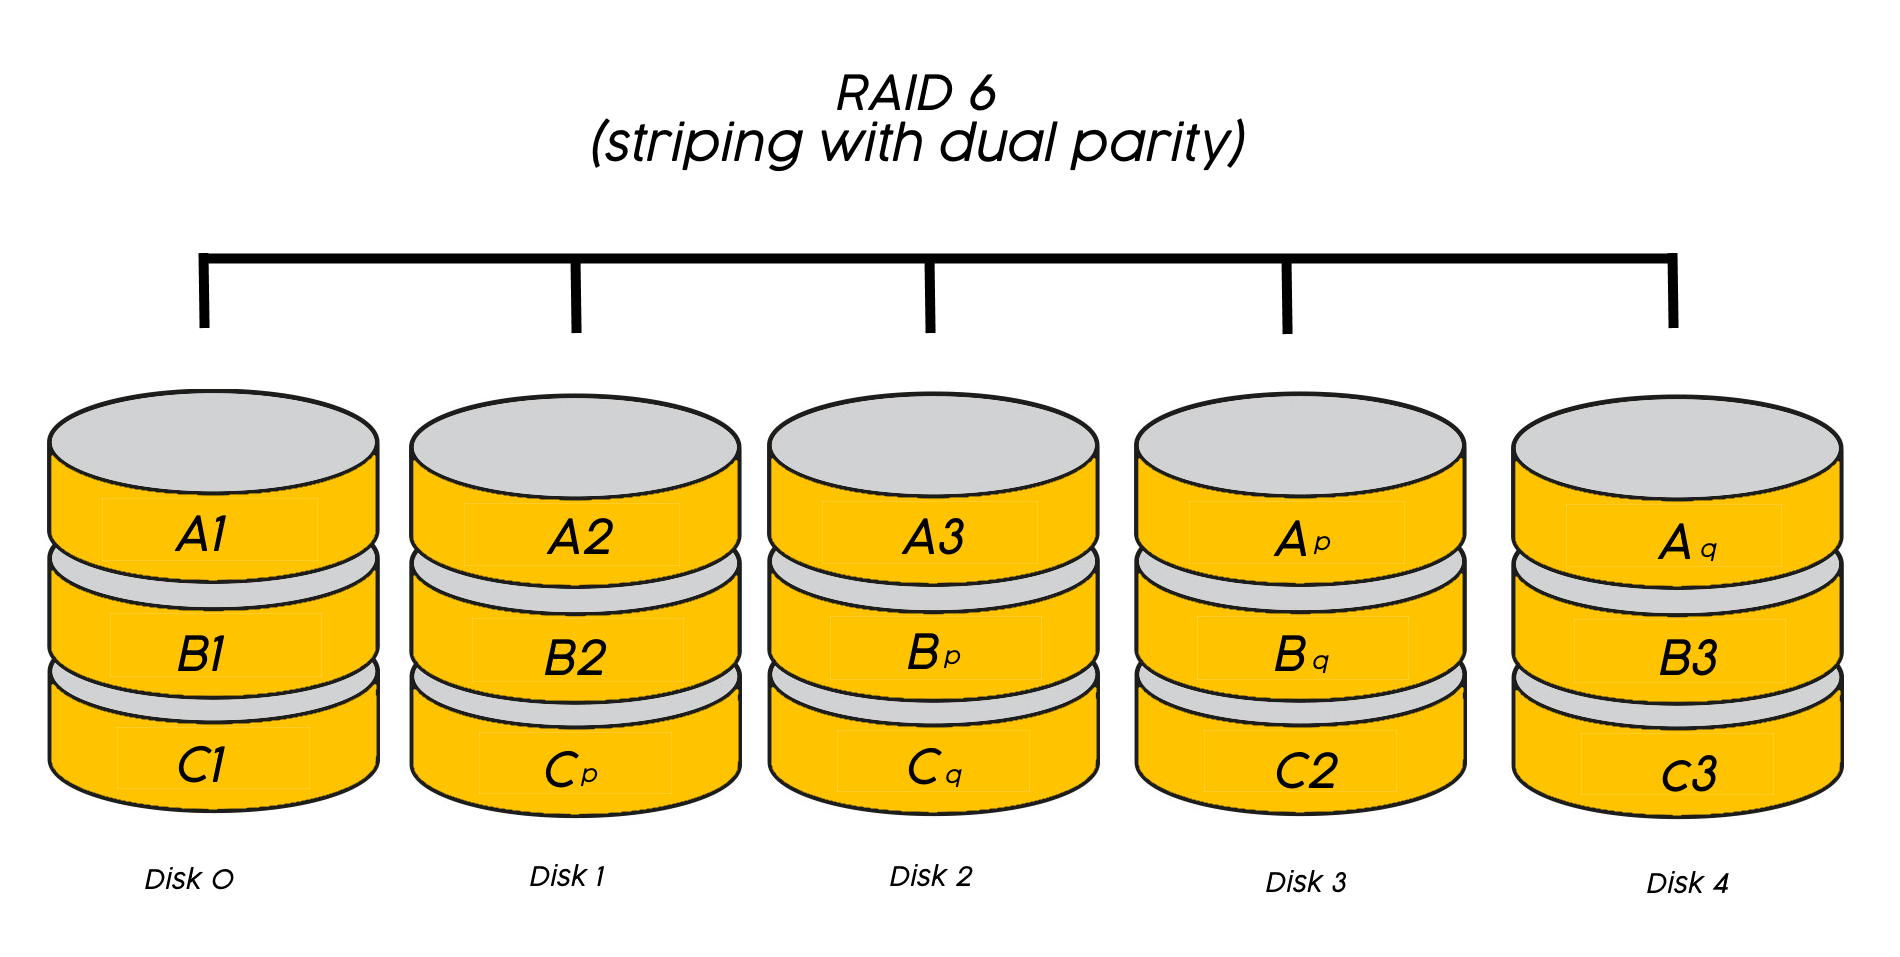 A diagram of RAID 6 array striping with dual parity